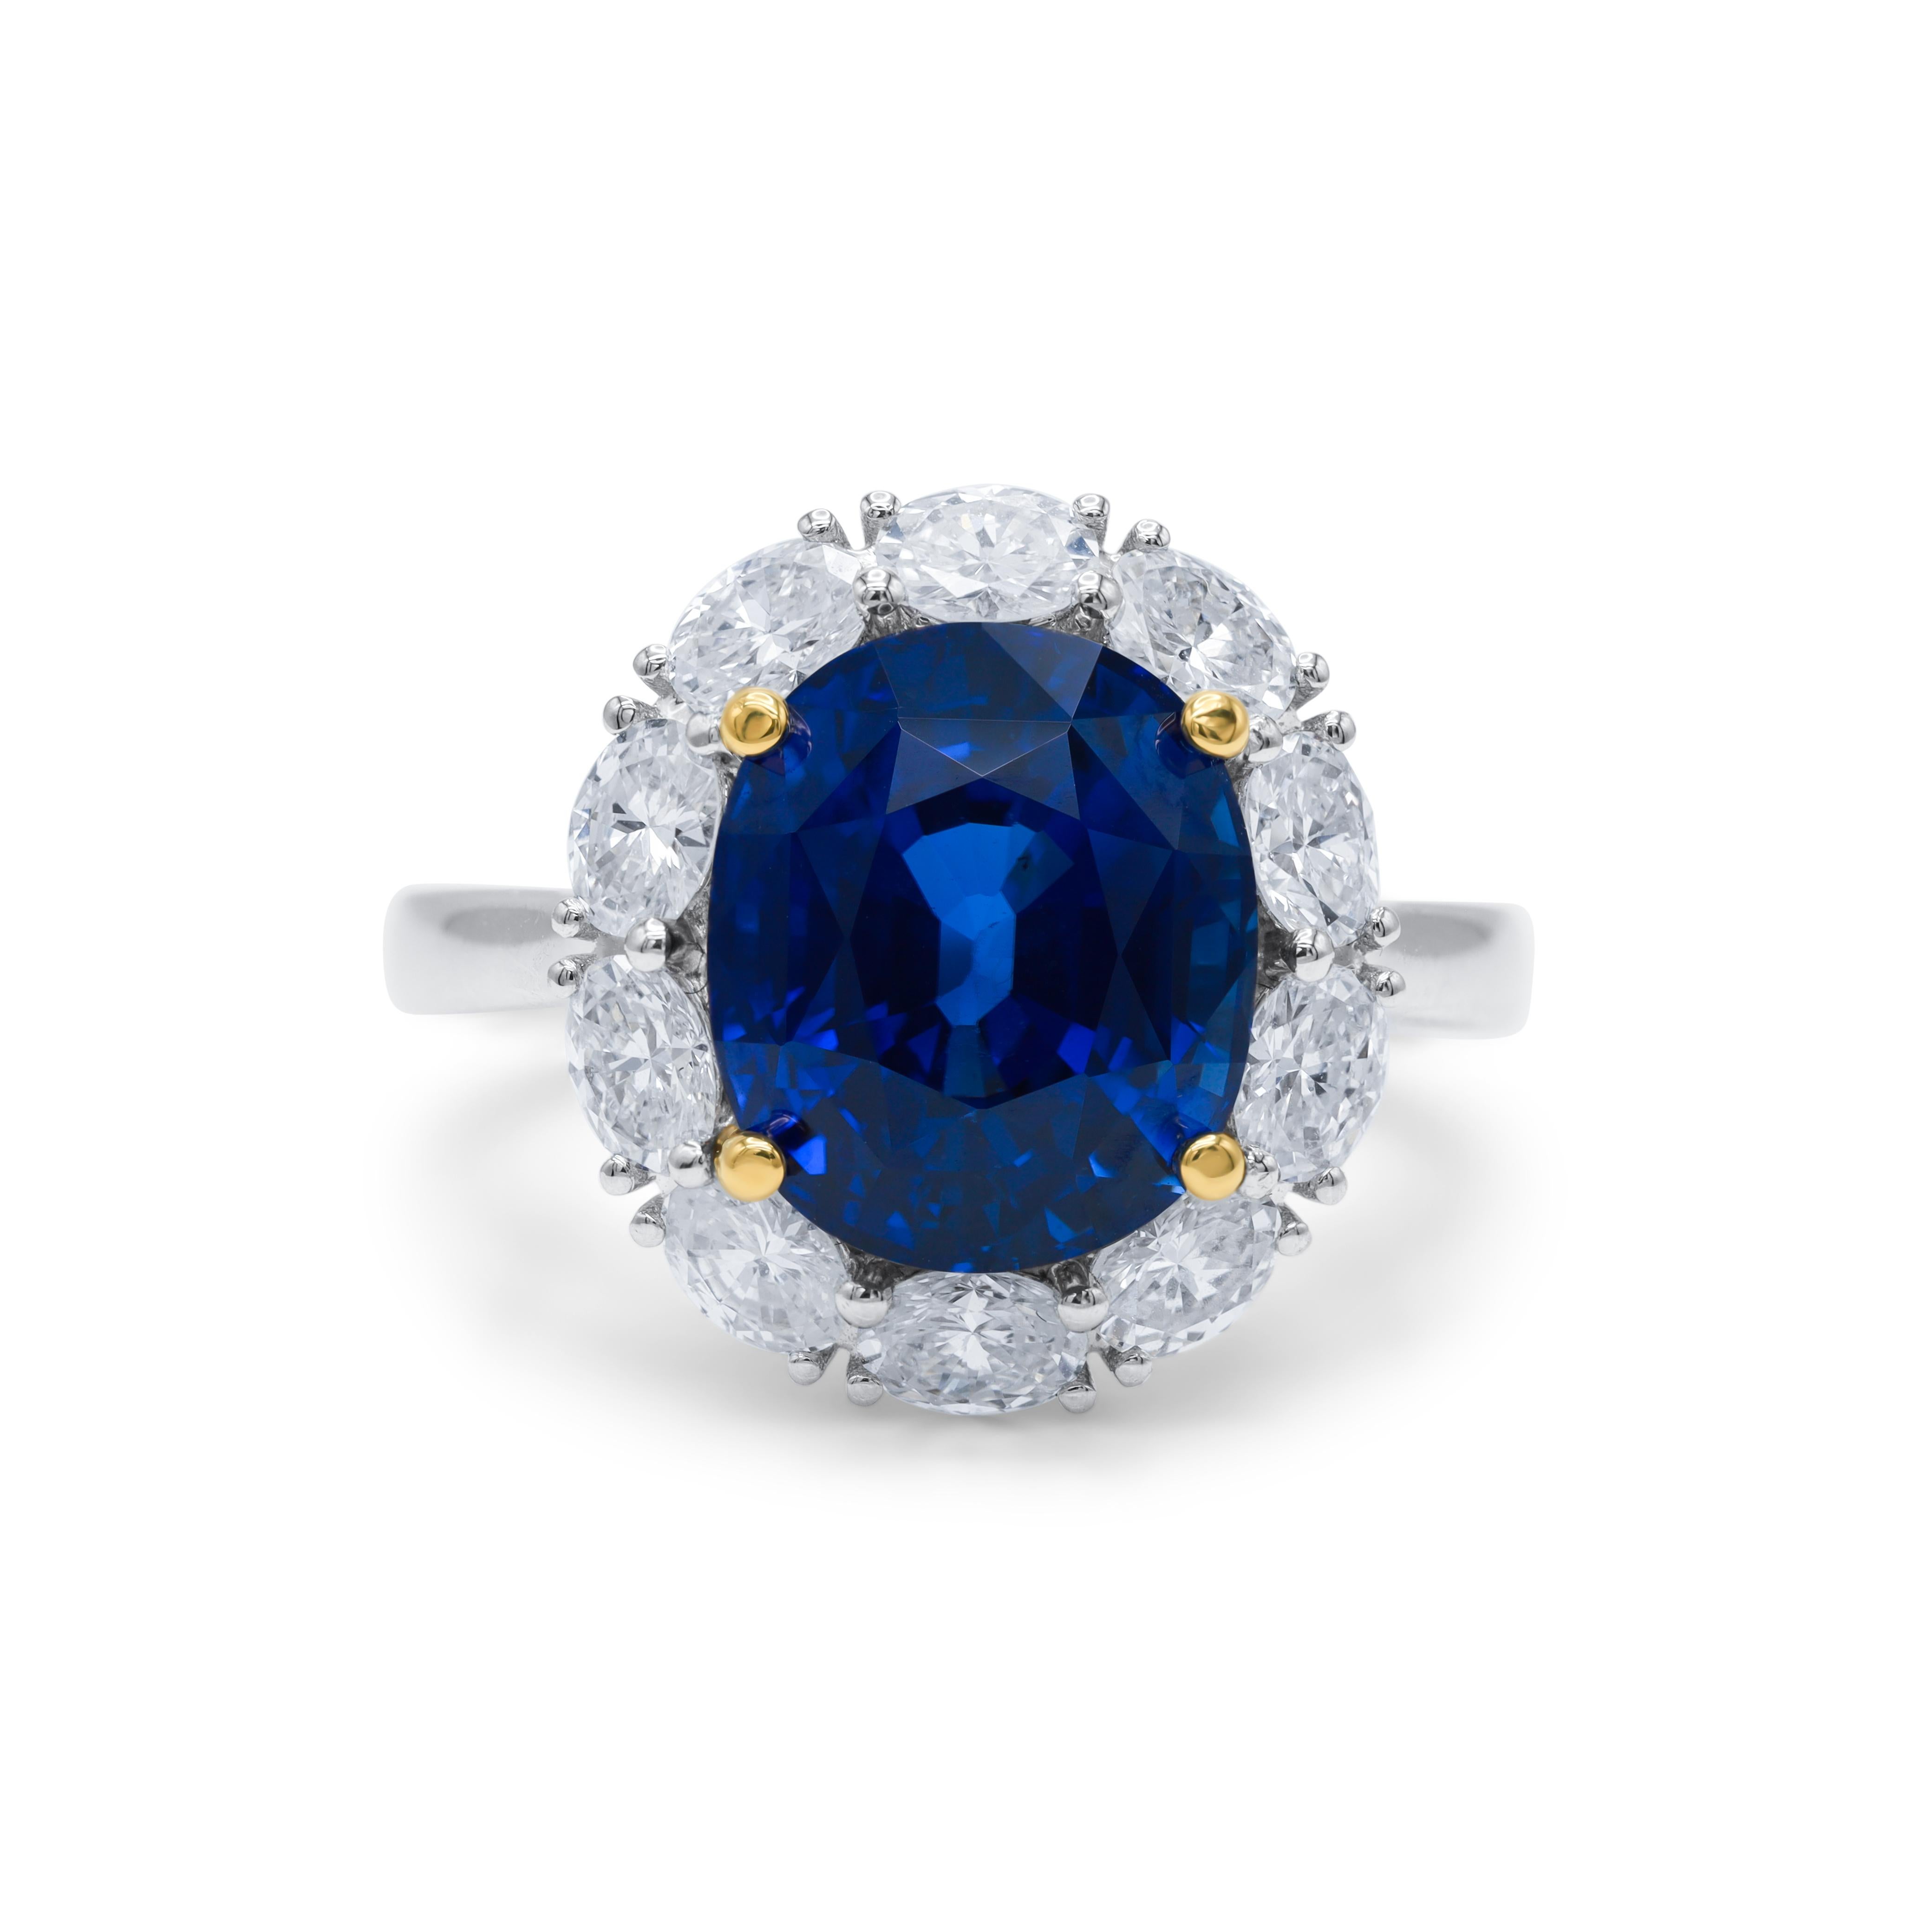 Platinum sapphire and diamond Princess Diana ring featuring a 7.94 ct GIA certified natural oval cut blue sapphire (GIA#6223036519 ) surrounded by 1.39 cts tw of round diamonds.
Diana M. is a leading supplier of top-quality fine jewelry for over 35